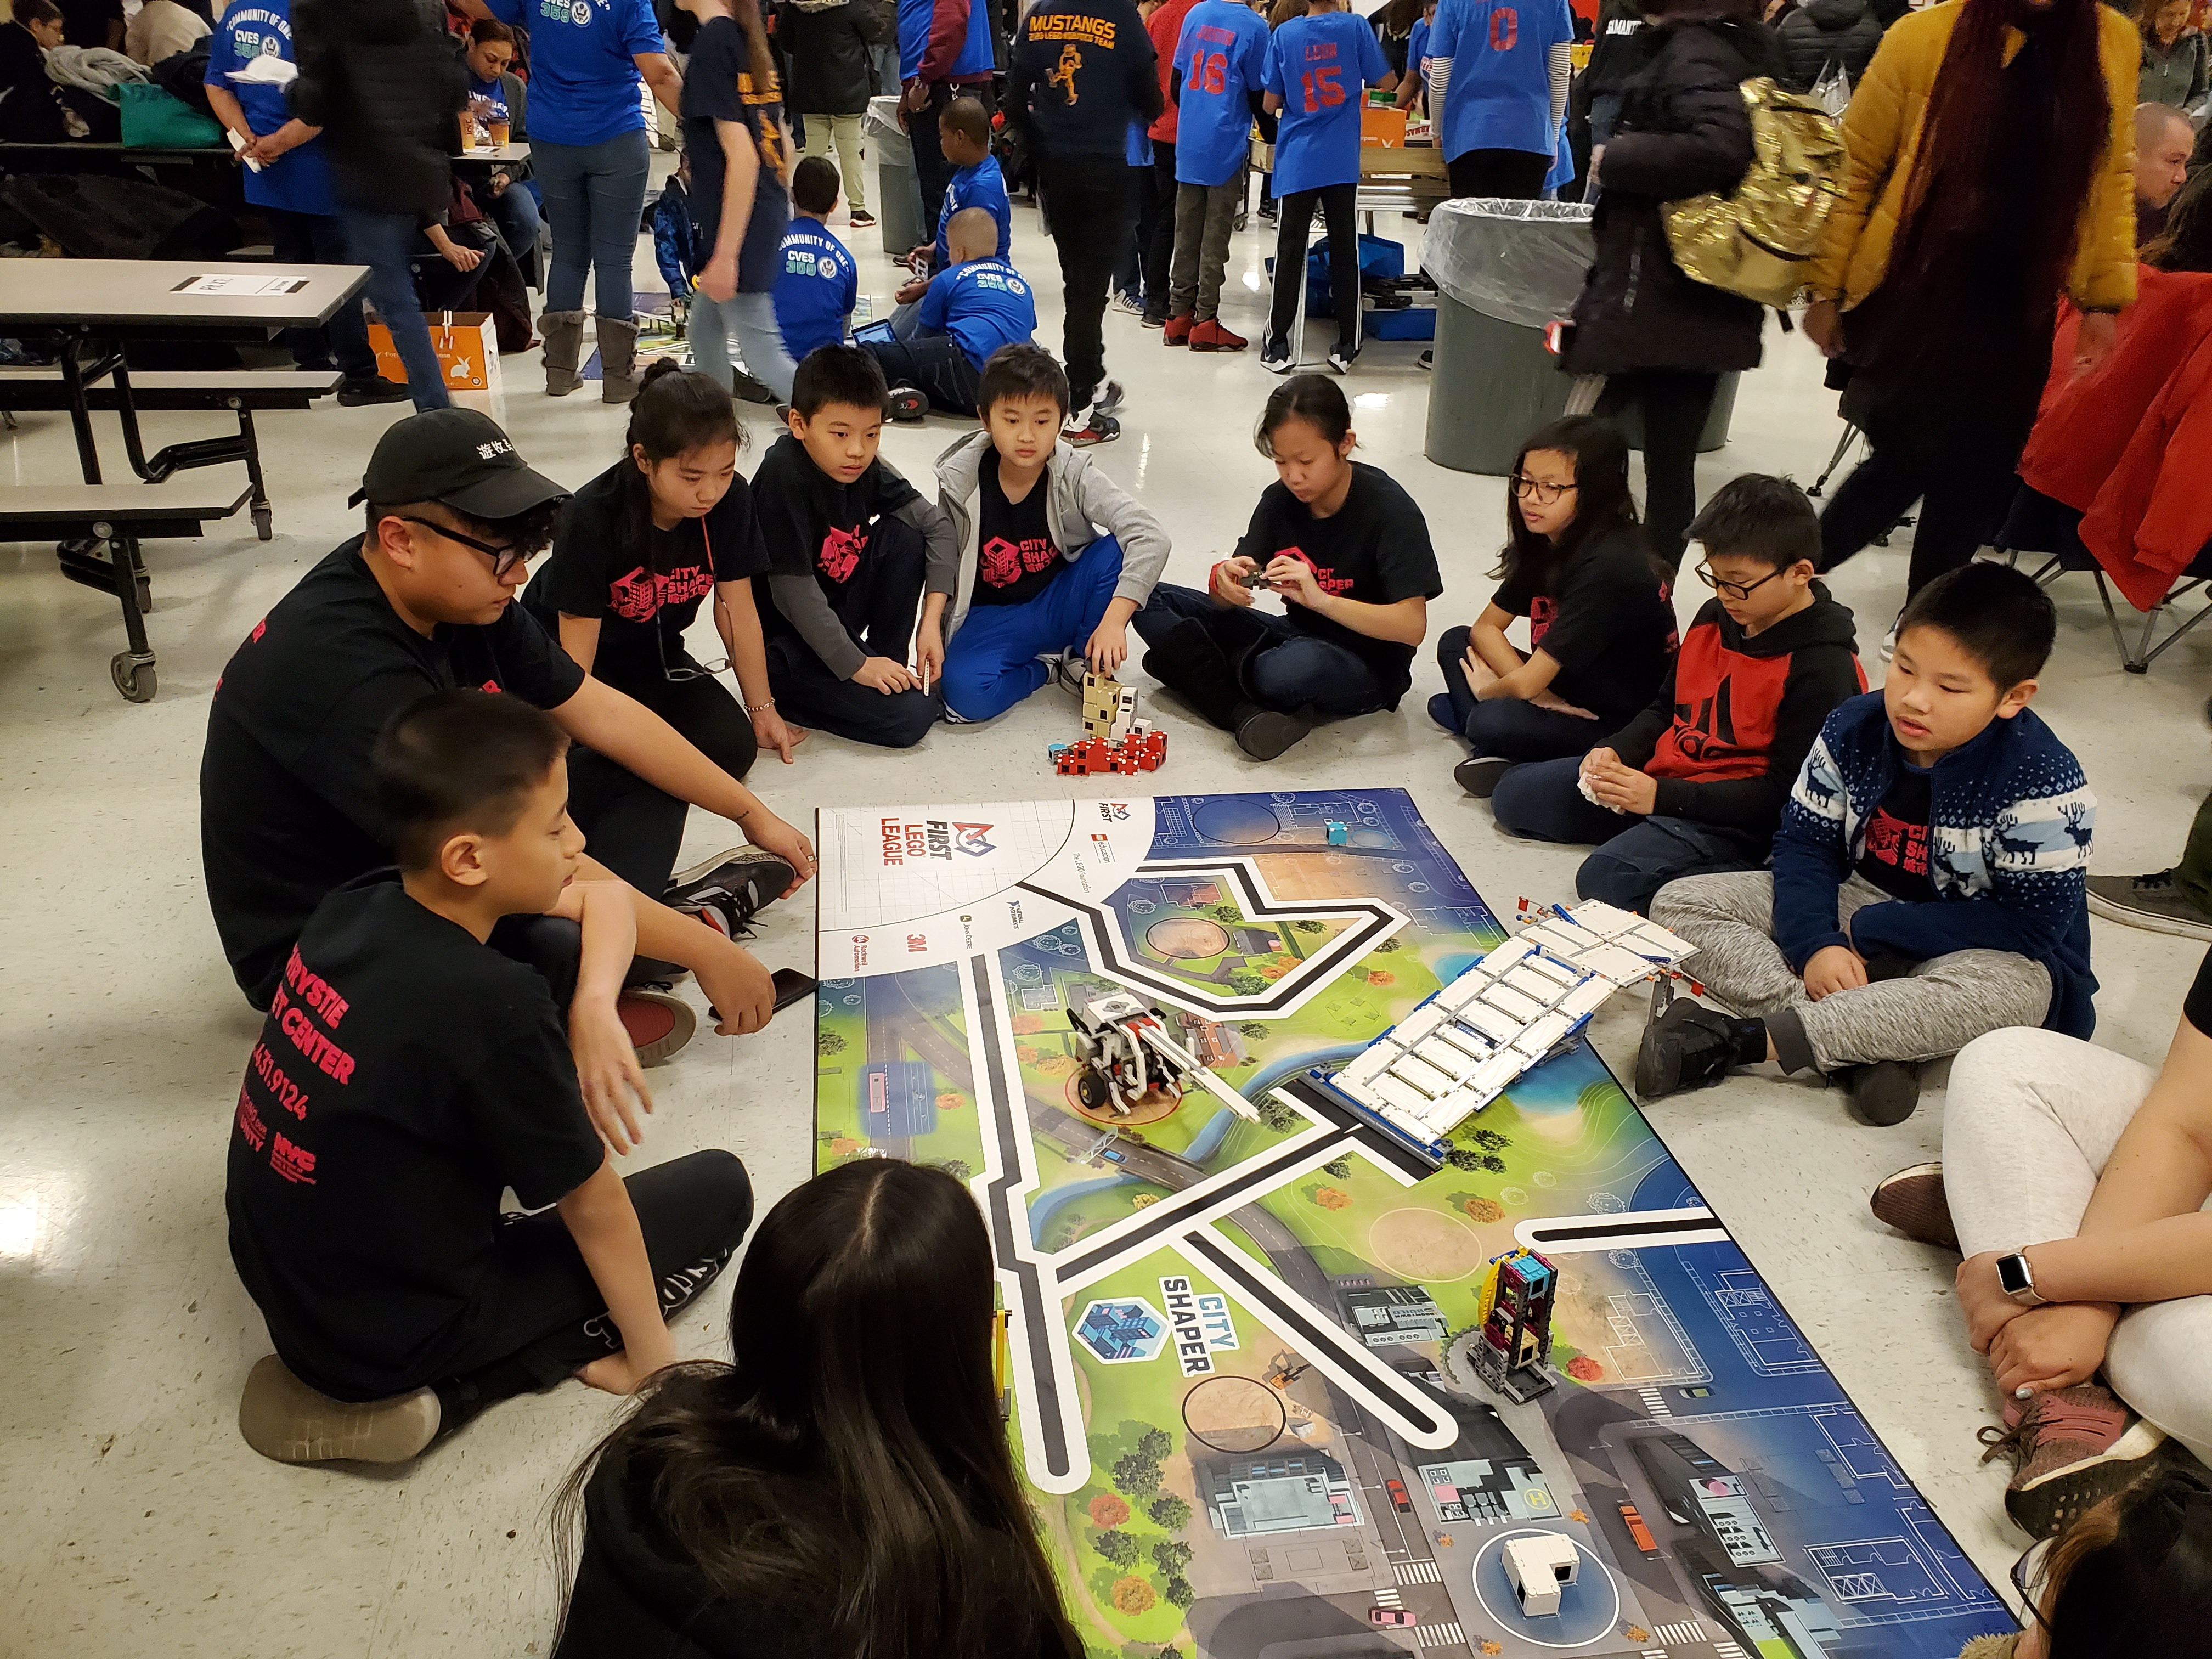 NYC FIRST Lego League | Planning